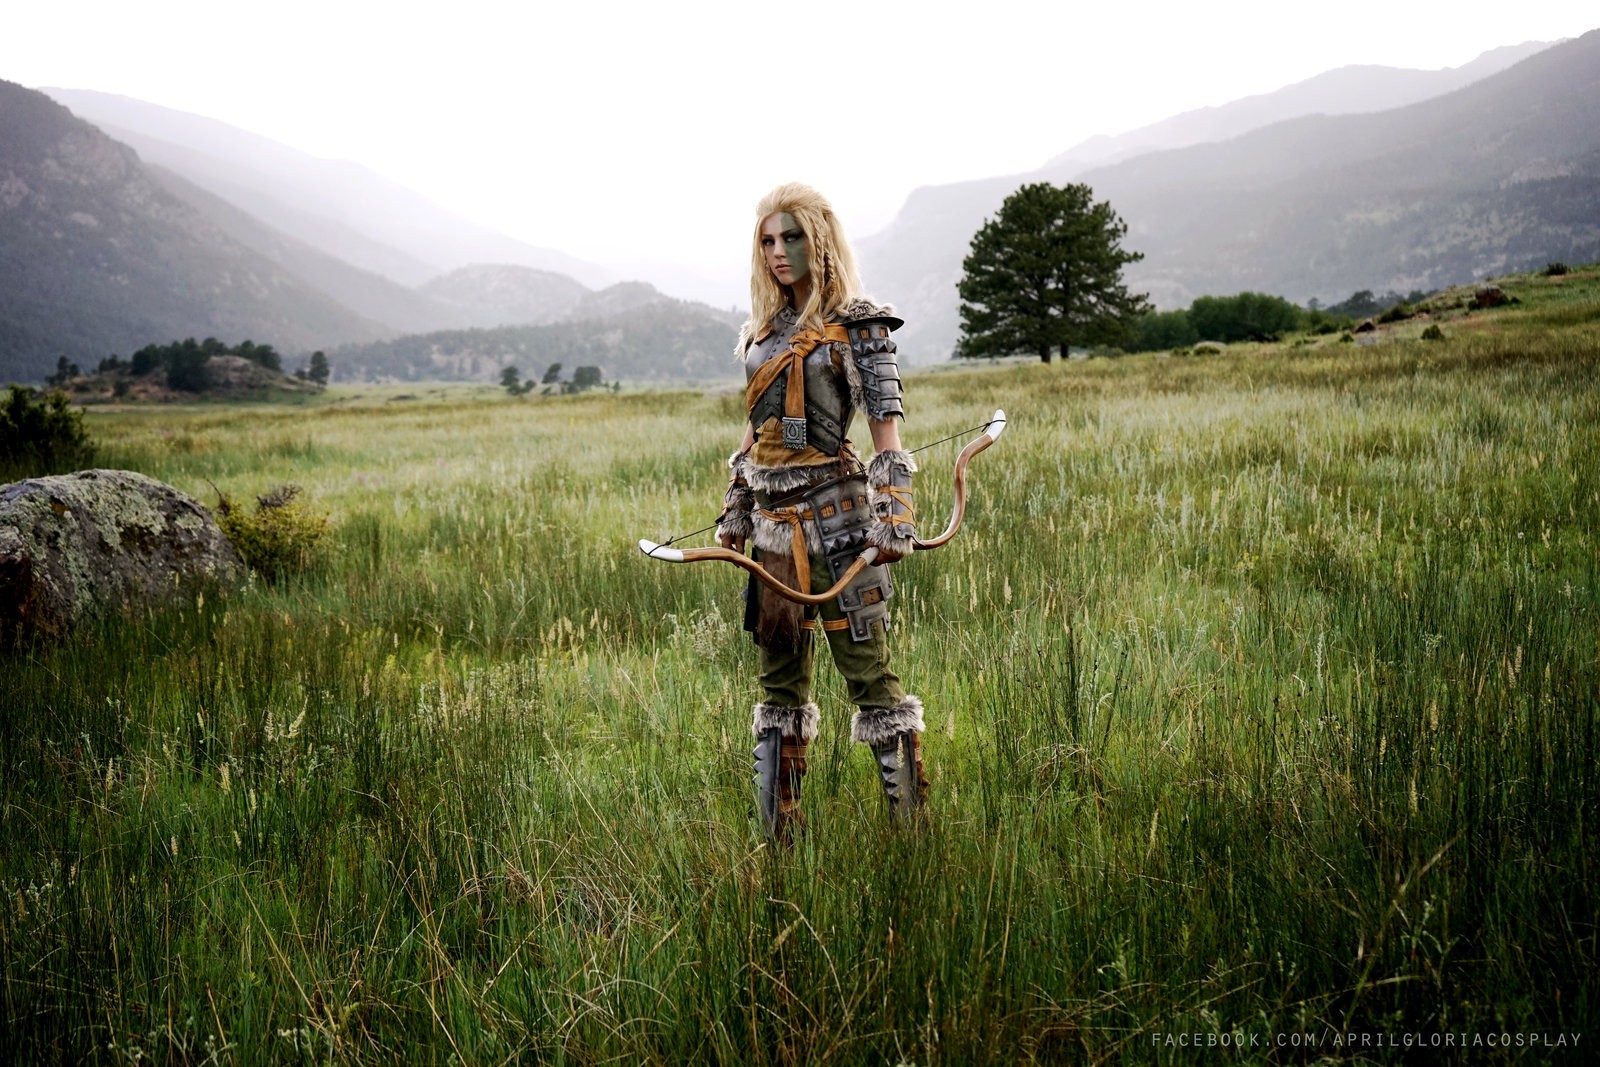 People 1600x1067 women cosplay long hair The Elder Scrolls V: Skyrim bow armor nature girl in armor armored woman video game girls model fantasy girl landscape women outdoors outdoors face paint blonde video games PC gaming